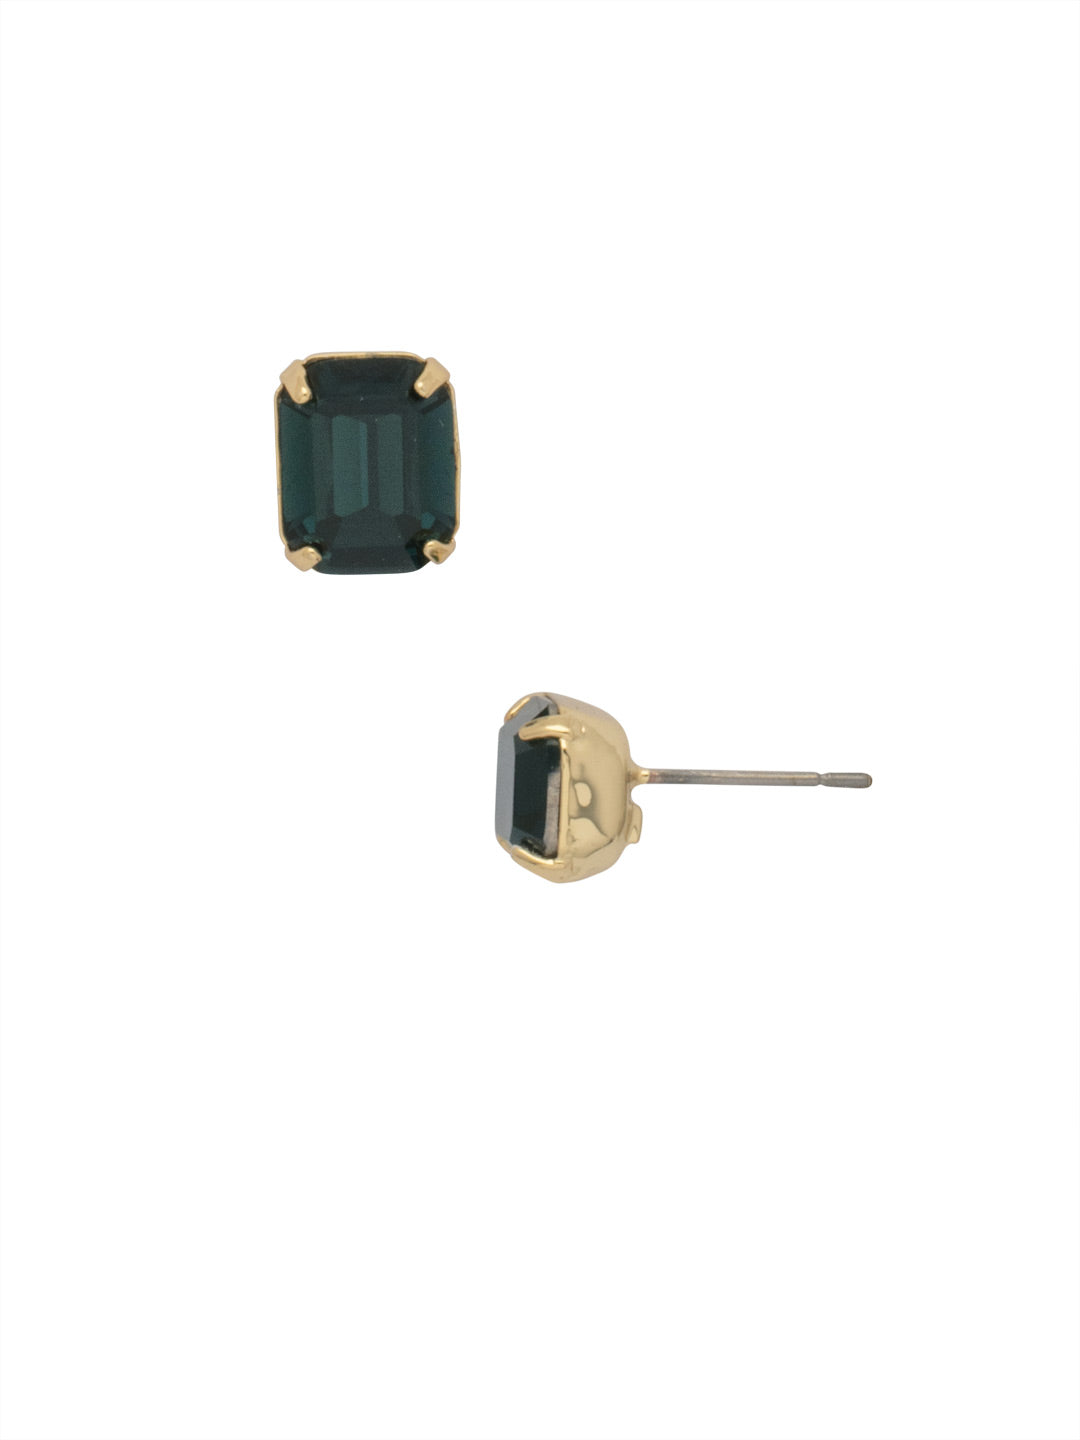 Octavia Stud Earrings - EDU53BGMON - <p>These rounded emerald cut stud earrings can be worn alone or paired with anything for just a bit of extra bling! From Sorrelli's Montana collection in our Bright Gold-tone finish.</p>